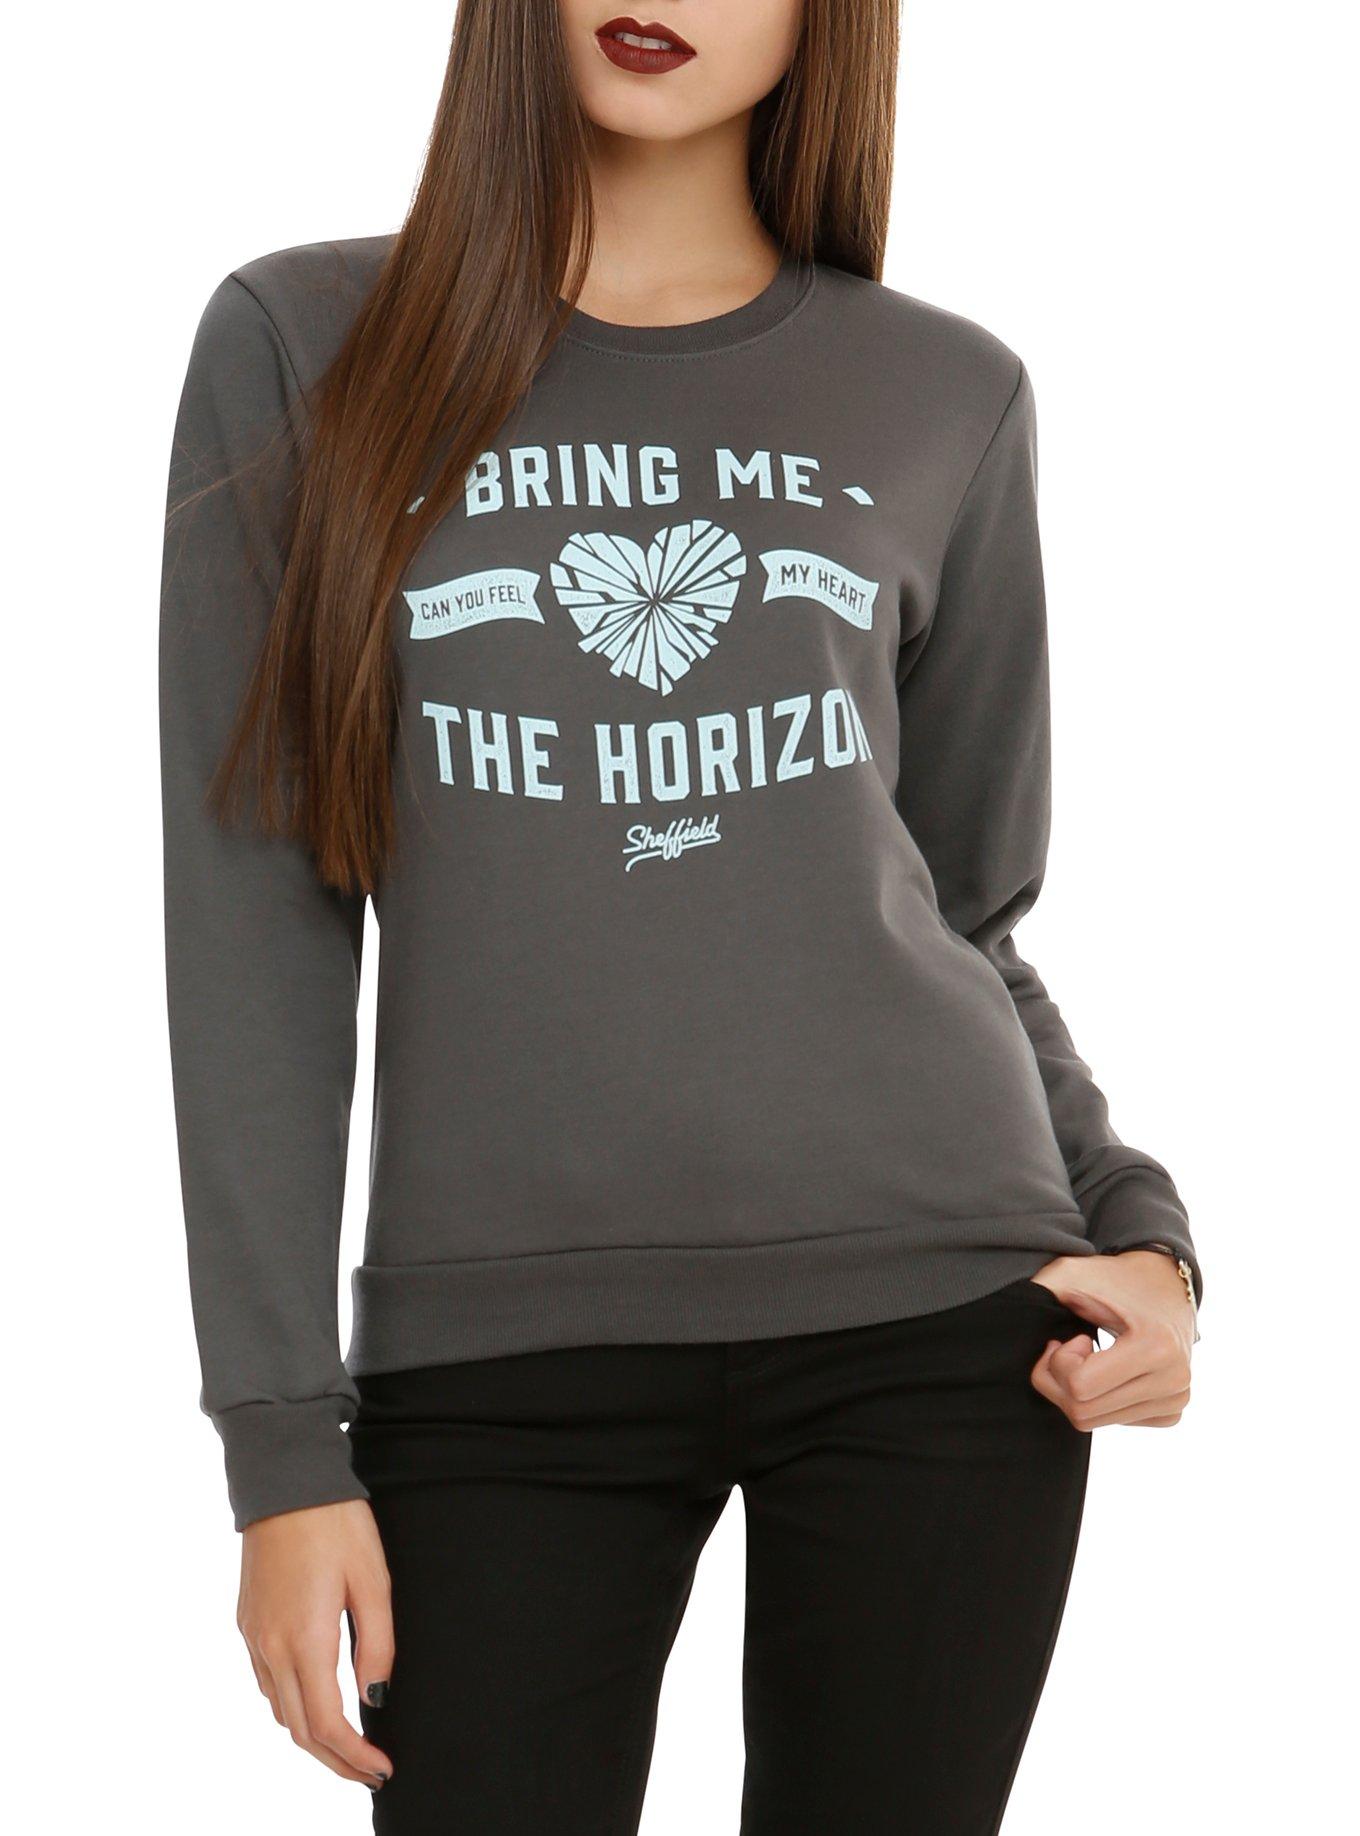 Bring Me The Horizon Shattered Heart Girls Pullover Top, GREY, hi-res